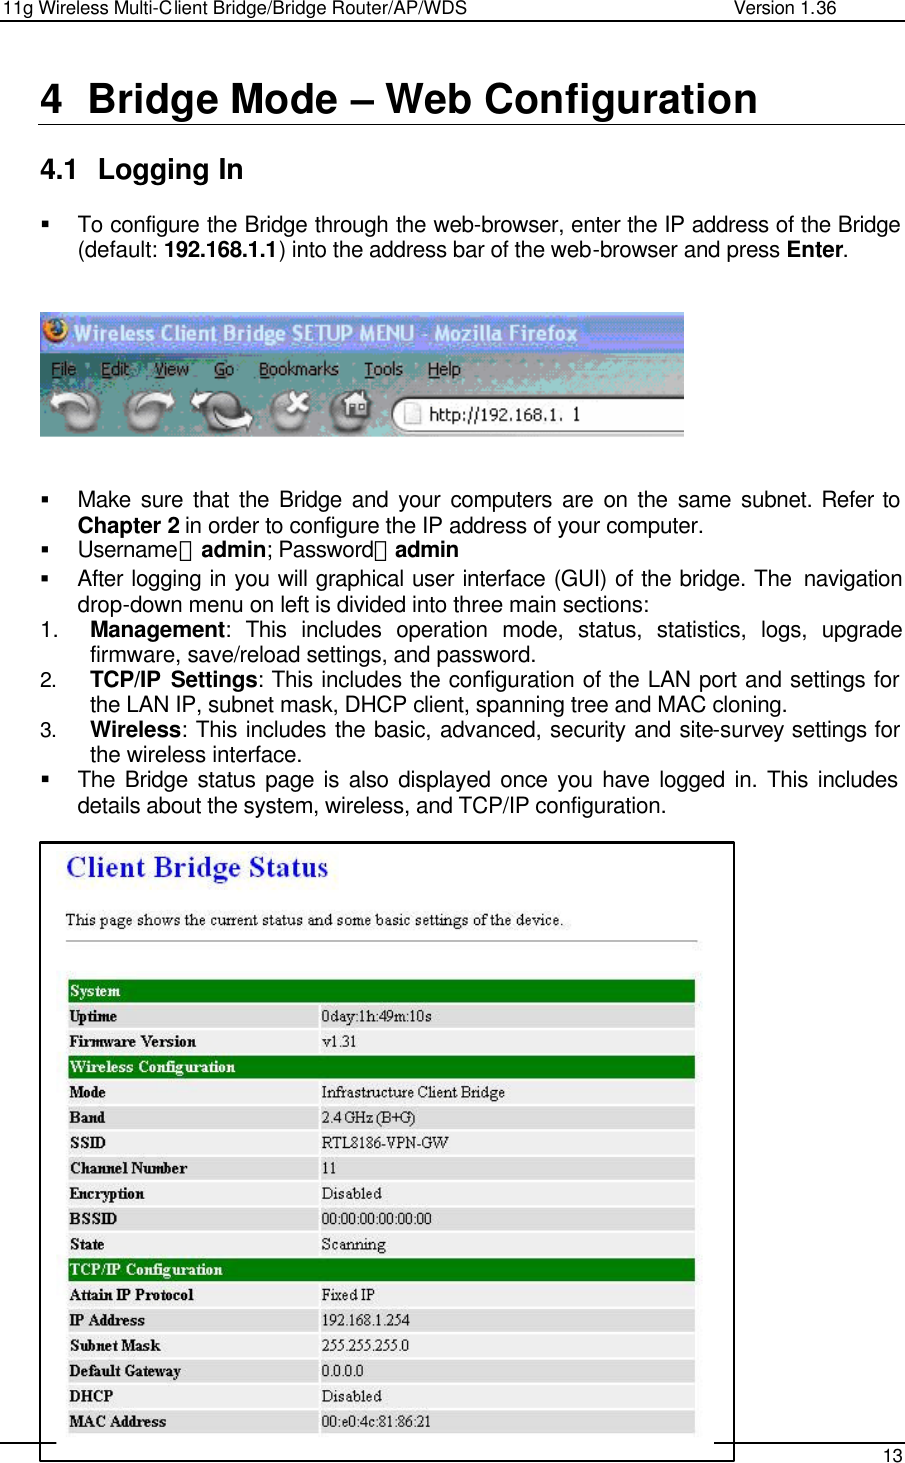 11g Wireless Multi-Client Bridge/Bridge Router/AP/WDS                                                   Version 1.36    13  4 Bridge Mode – Web Configuration  4.1 Logging In  § To configure the Bridge through the web-browser, enter the IP address of the Bridge (default: 192.168.1.1) into the address bar of the web-browser and press Enter.       § Make sure that the Bridge and your computers are on the same subnet. Refer to Chapter 2 in order to configure the IP address of your computer. § Username：admin; Password：admin § After logging in you will graphical user interface (GUI) of the bridge. The  navigation drop-down menu on left is divided into three main sections: 1. Management: This includes operation mode, status, statistics, logs, upgrade firmware, save/reload settings, and password.  2. TCP/IP Settings: This includes the configuration of the LAN port and settings for the LAN IP, subnet mask, DHCP client, spanning tree and MAC cloning.  3. Wireless: This includes the basic, advanced, security and site-survey settings for the wireless interface.  § The Bridge status page is also displayed once you have logged in. This includes details about the system, wireless, and TCP/IP configuration.                          